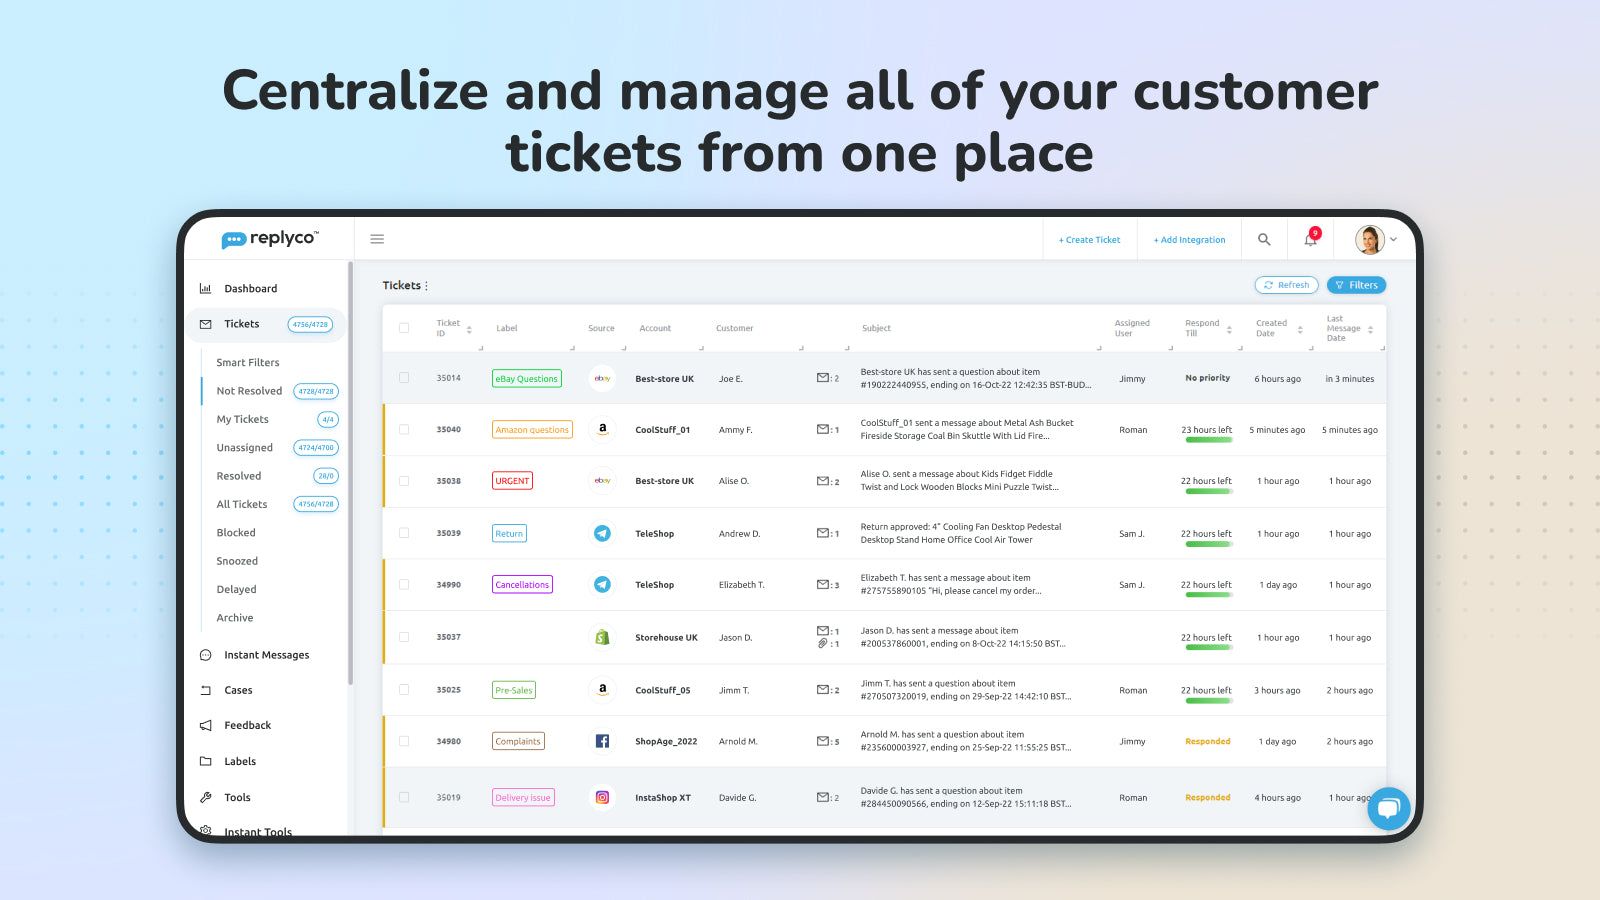 Replyco - Manage all of your customer tickets from one place